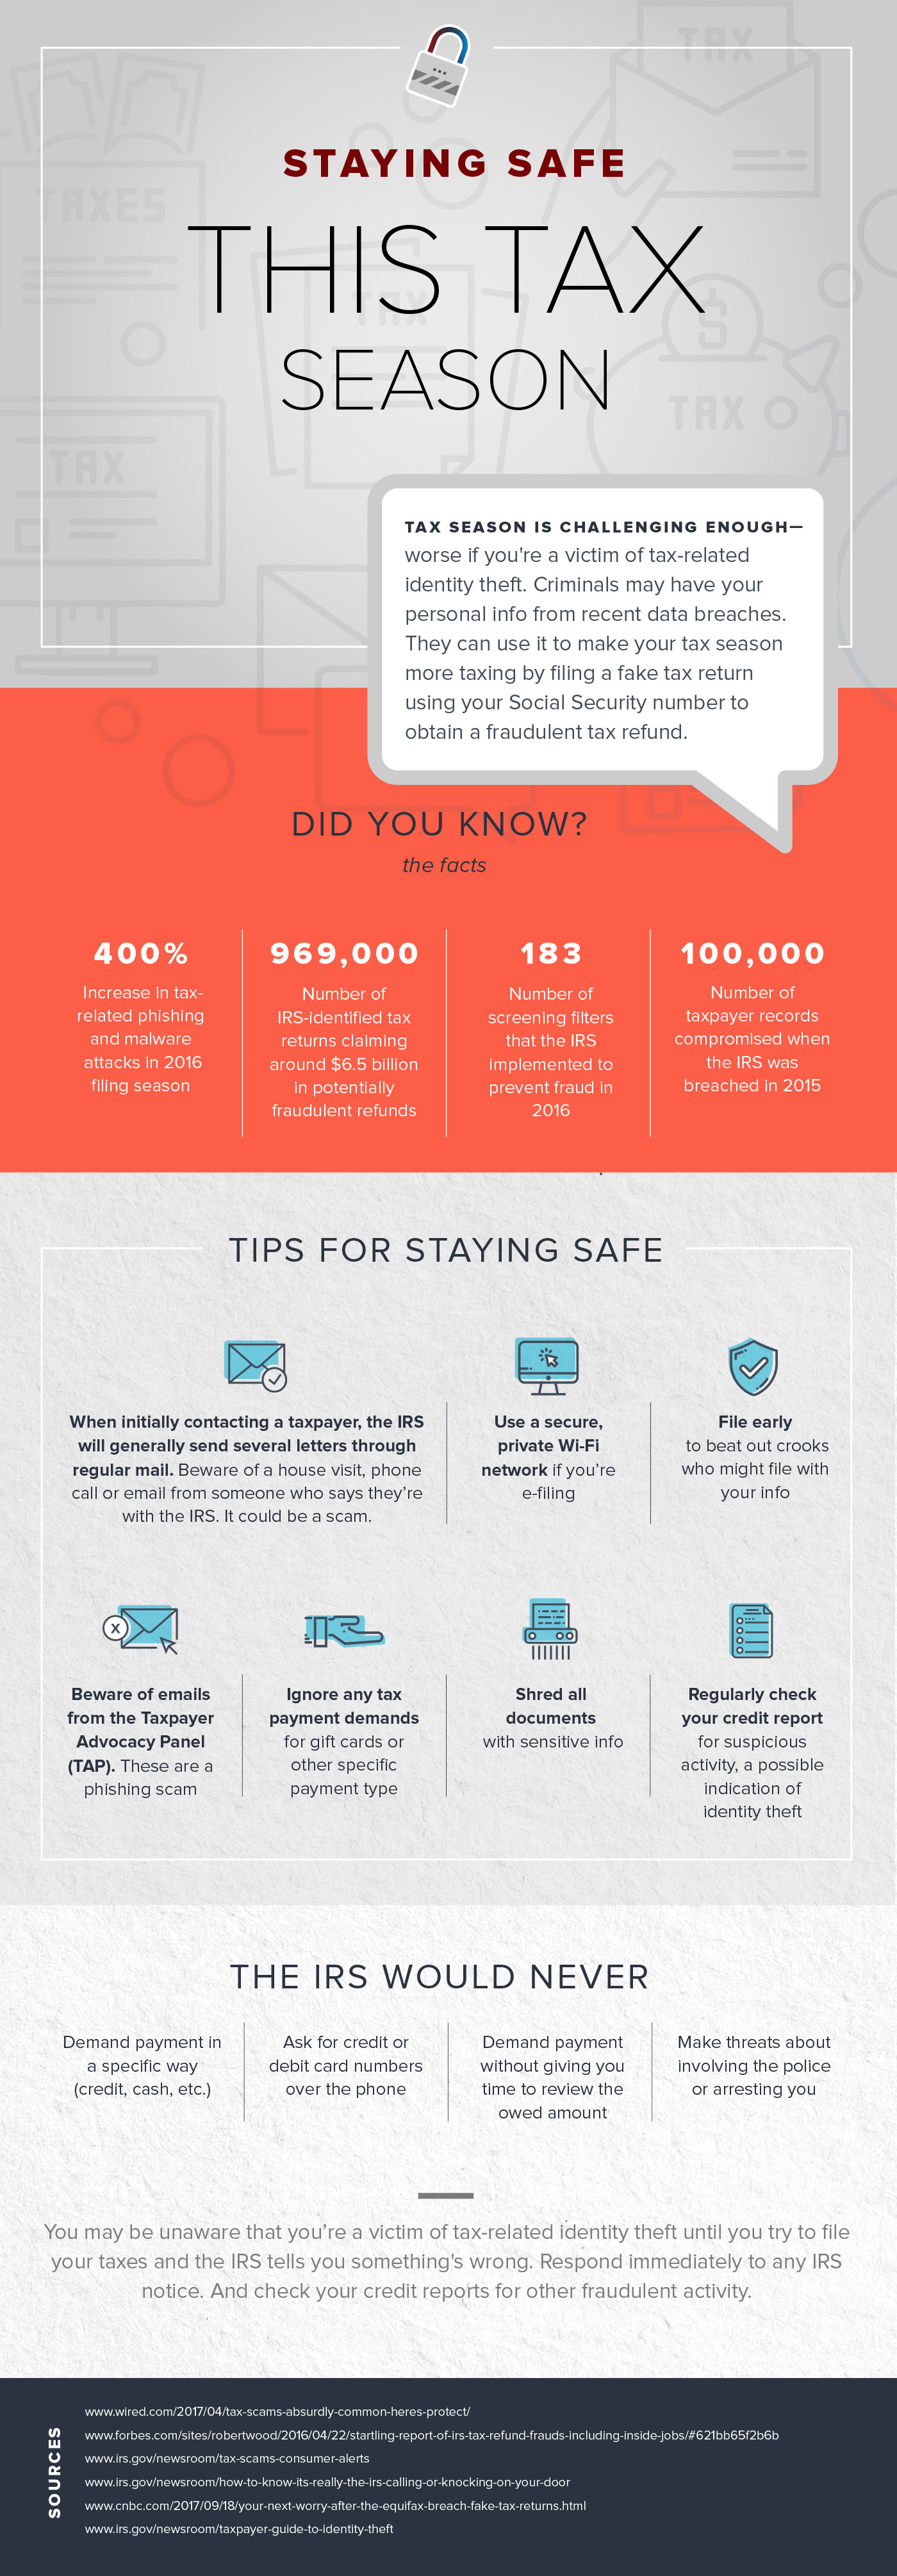 Staying safe during the tax season - infographic